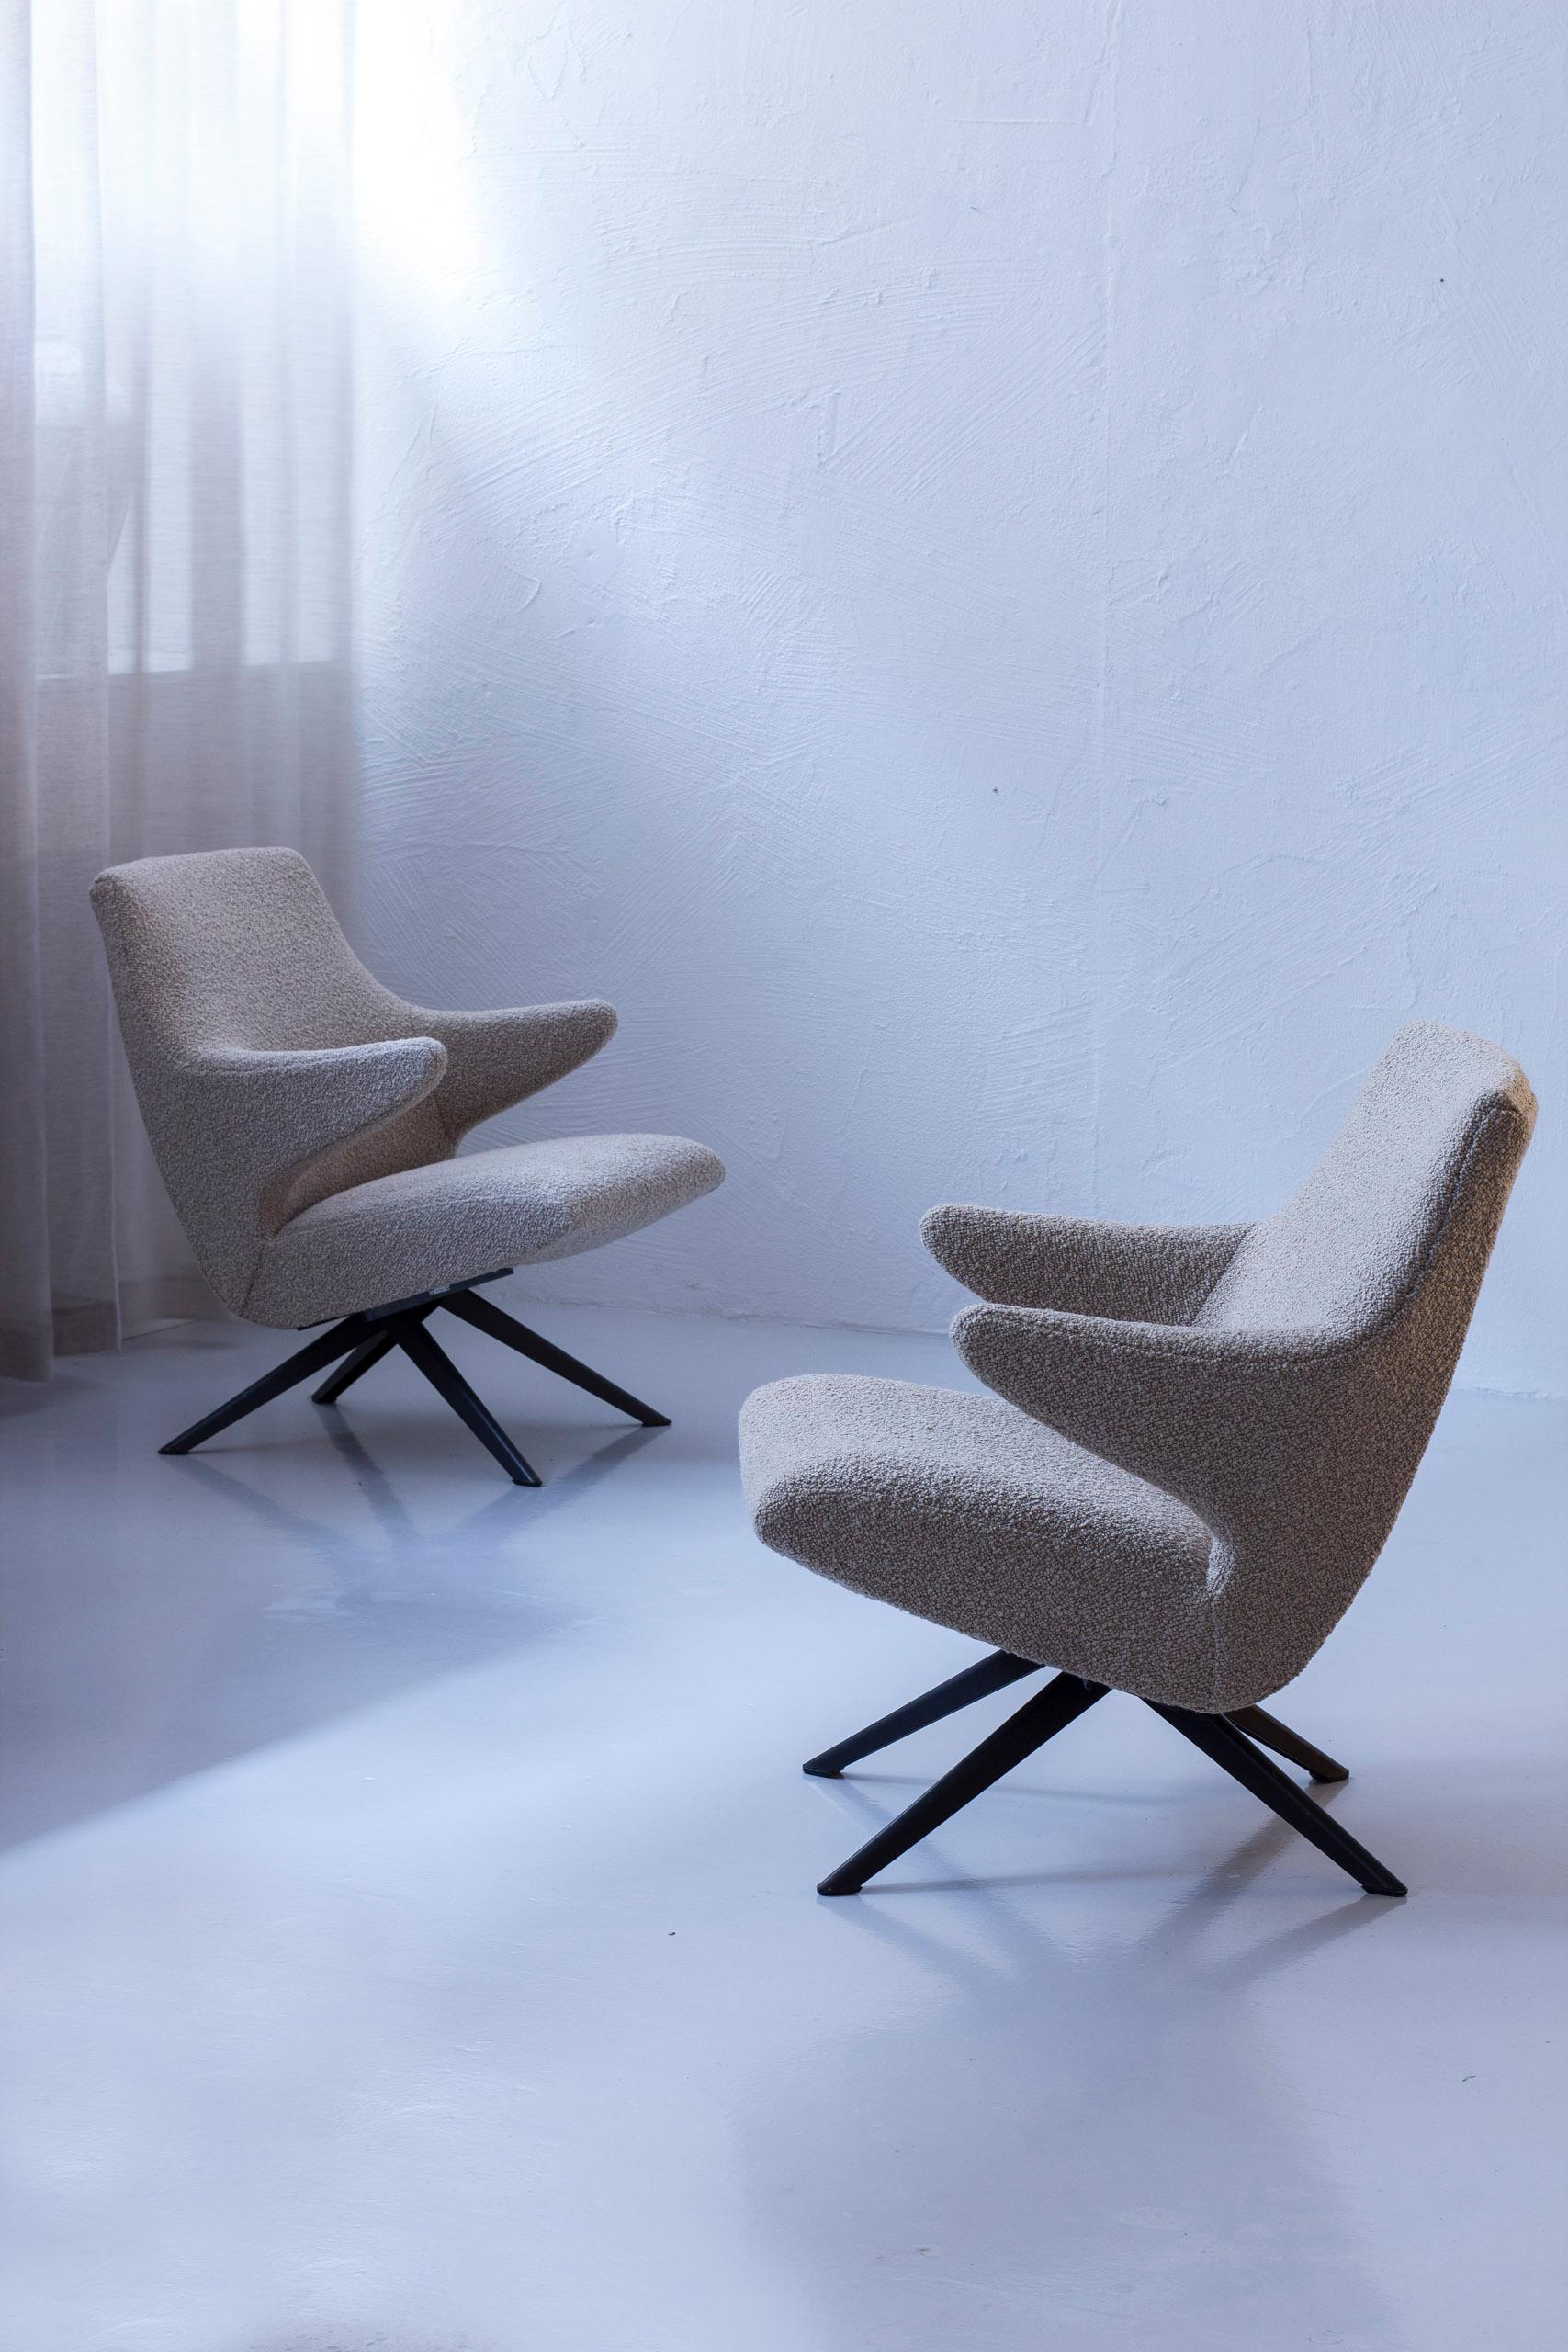 Swedish Pair of lounge chairs designed by Bengt Ruda by Nordiska Kompaniet, 1950 For Sale